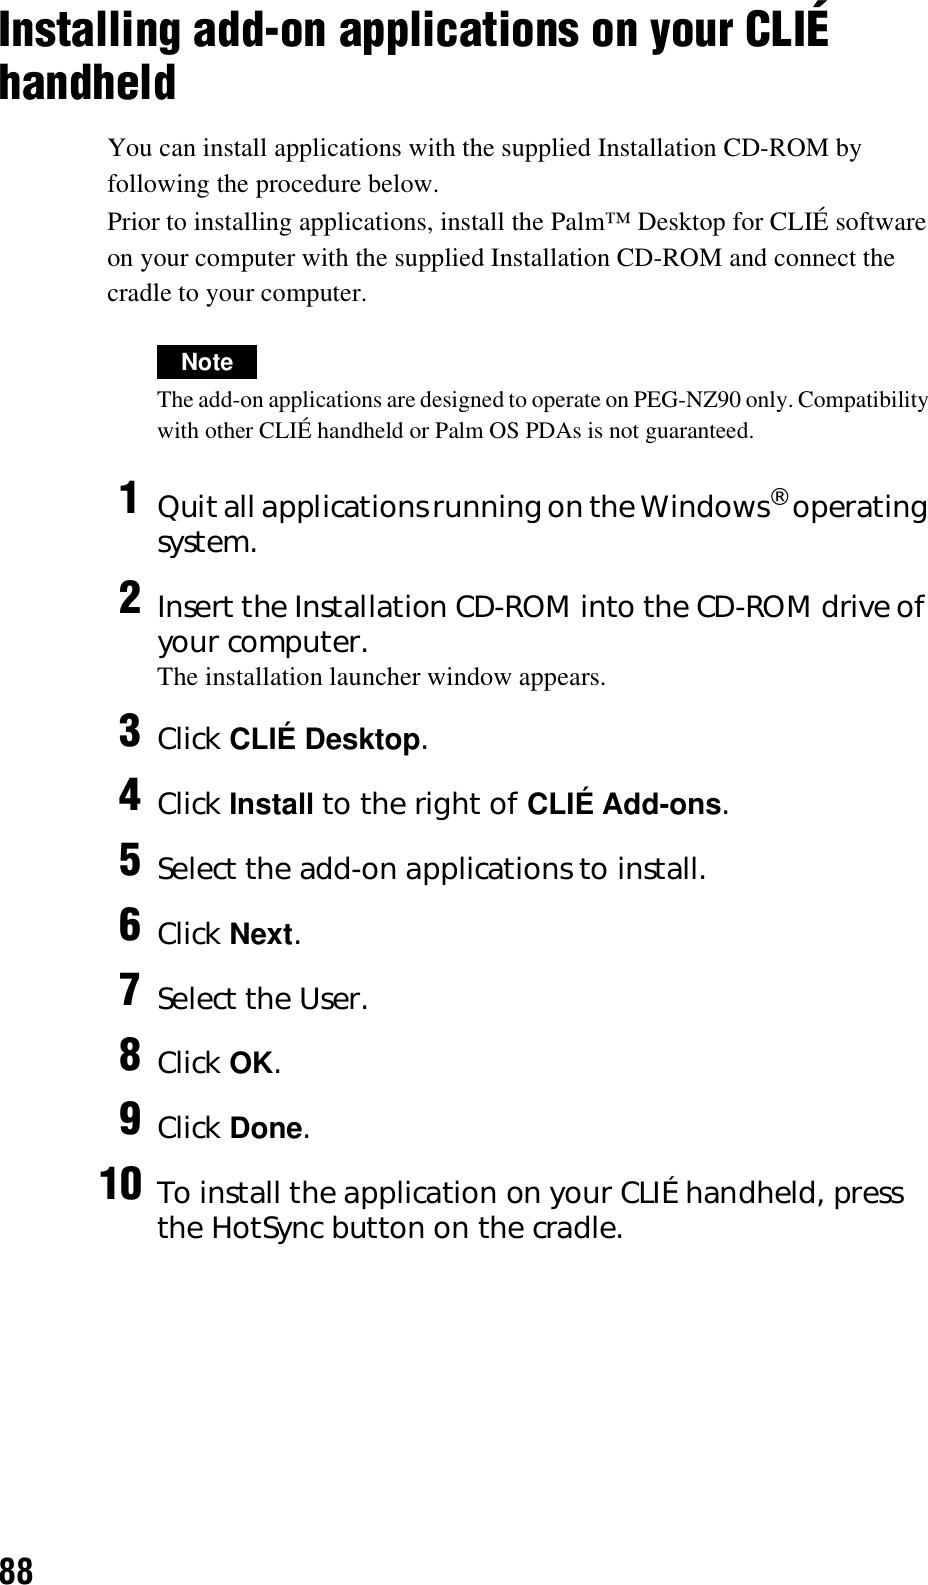 88Installing add-on applications on your CLIÉ handheldYou can install applications with the supplied Installation CD-ROM by following the procedure below.Prior to installing applications, install the Palm™ Desktop for CLIÉ software on your computer with the supplied Installation CD-ROM and connect the cradle to your computer.NoteThe add-on applications are designed to operate on PEG-NZ90 only. Compatibility with other CLIÉ handheld or Palm OS PDAs is not guaranteed.1Quit all applications running on the Windows® operating system.2Insert the Installation CD-ROM into the CD-ROM drive of your computer.The installation launcher window appears.3Click CLIÉ Desktop.4Click Install to the right of CLIÉ Add-ons.5Select the add-on applications to install.6Click Next.7Select the User.8Click OK.9Click Done.10 To install the application on your CLIÉ handheld, press the HotSync button on the cradle.